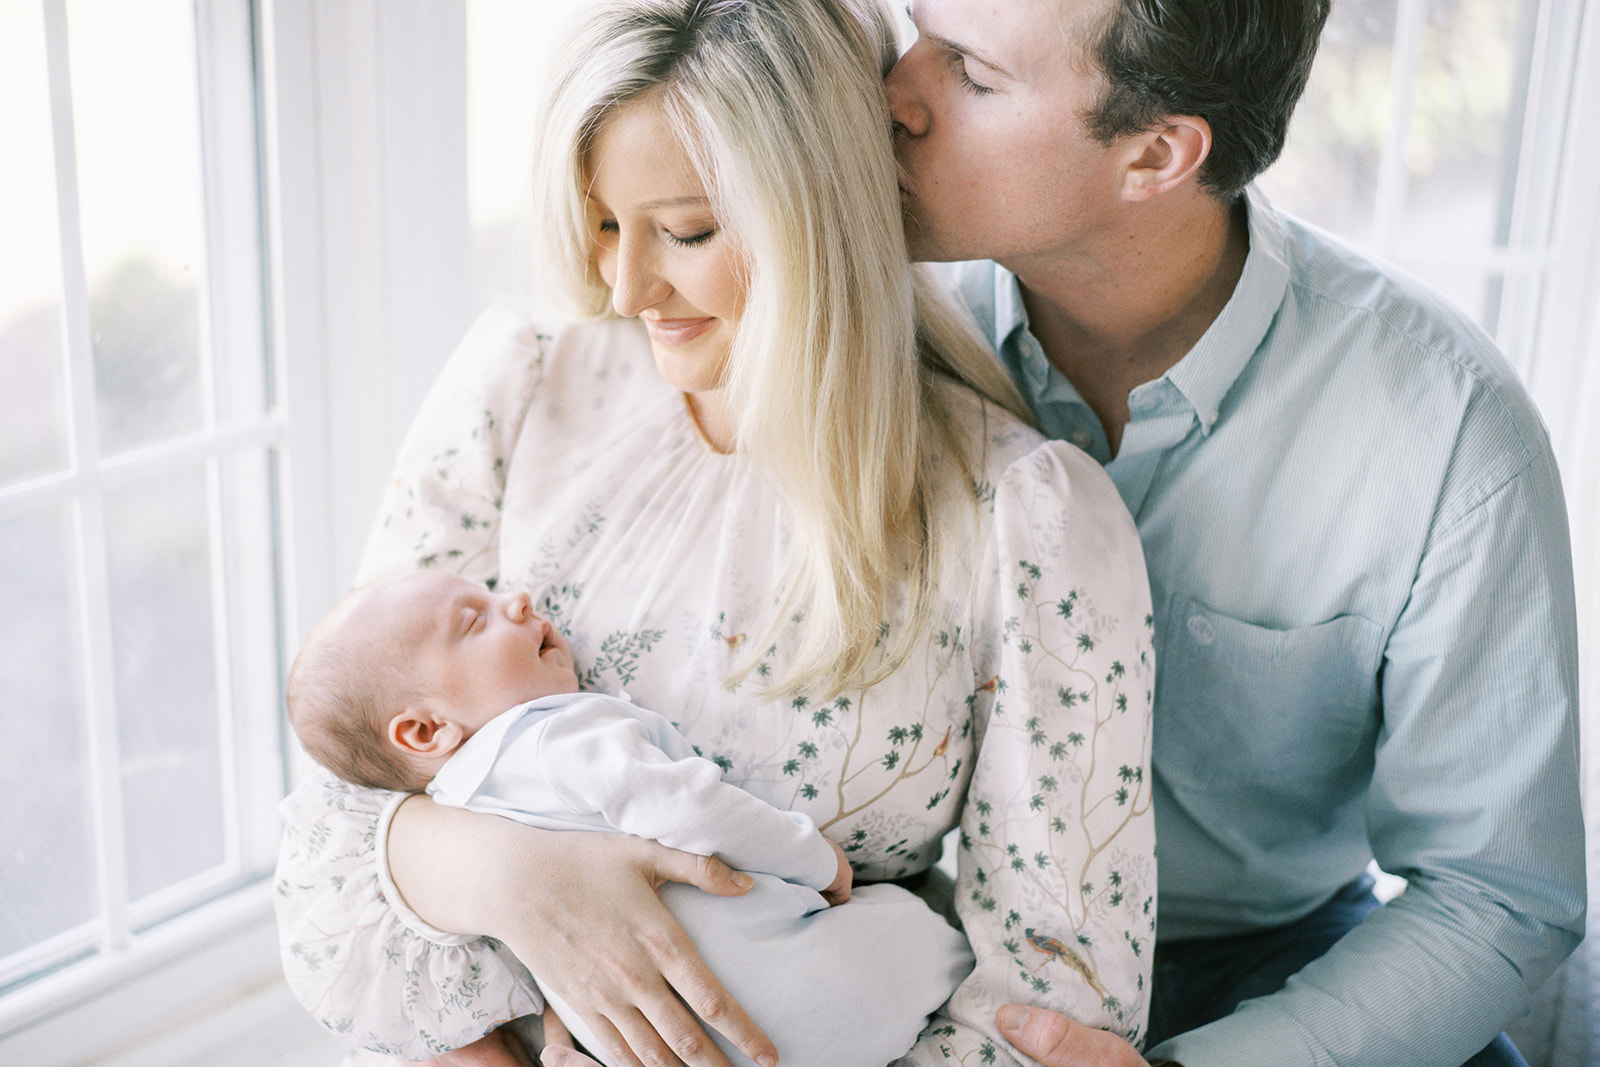 The Willoughby family gathers in front of the window with their new baby boy